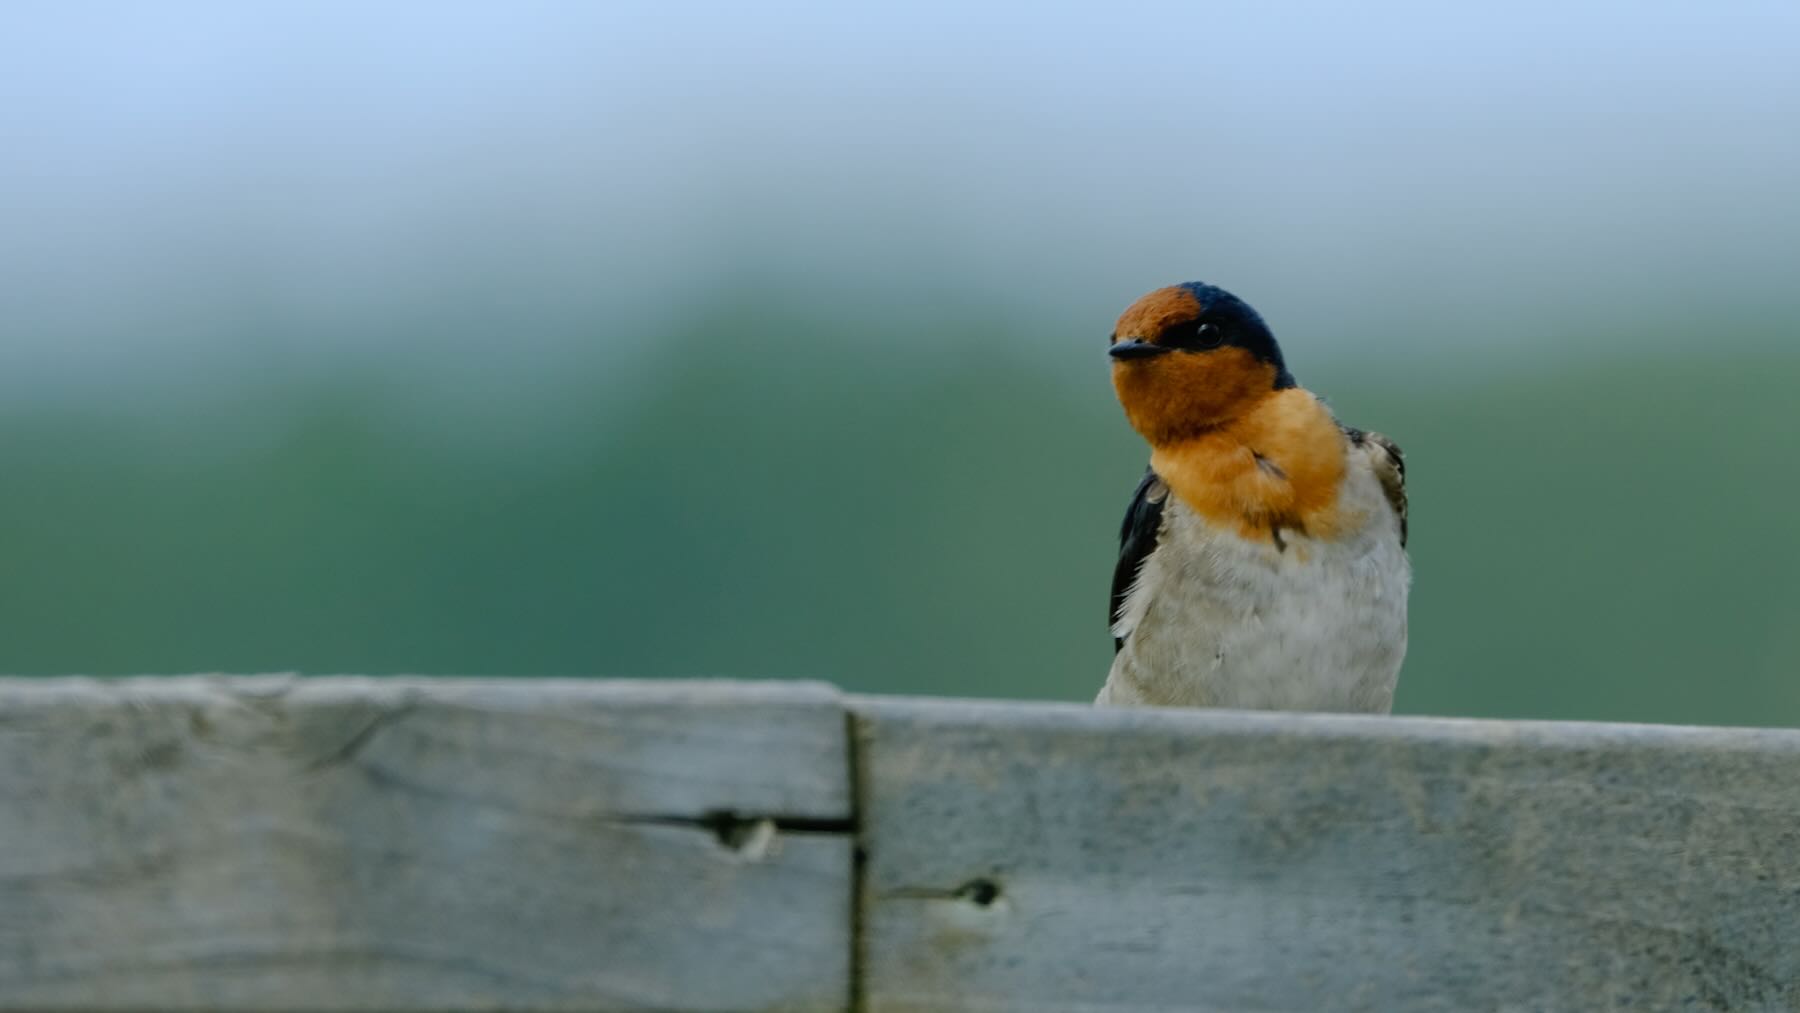 Swallow on the railing through the window. 